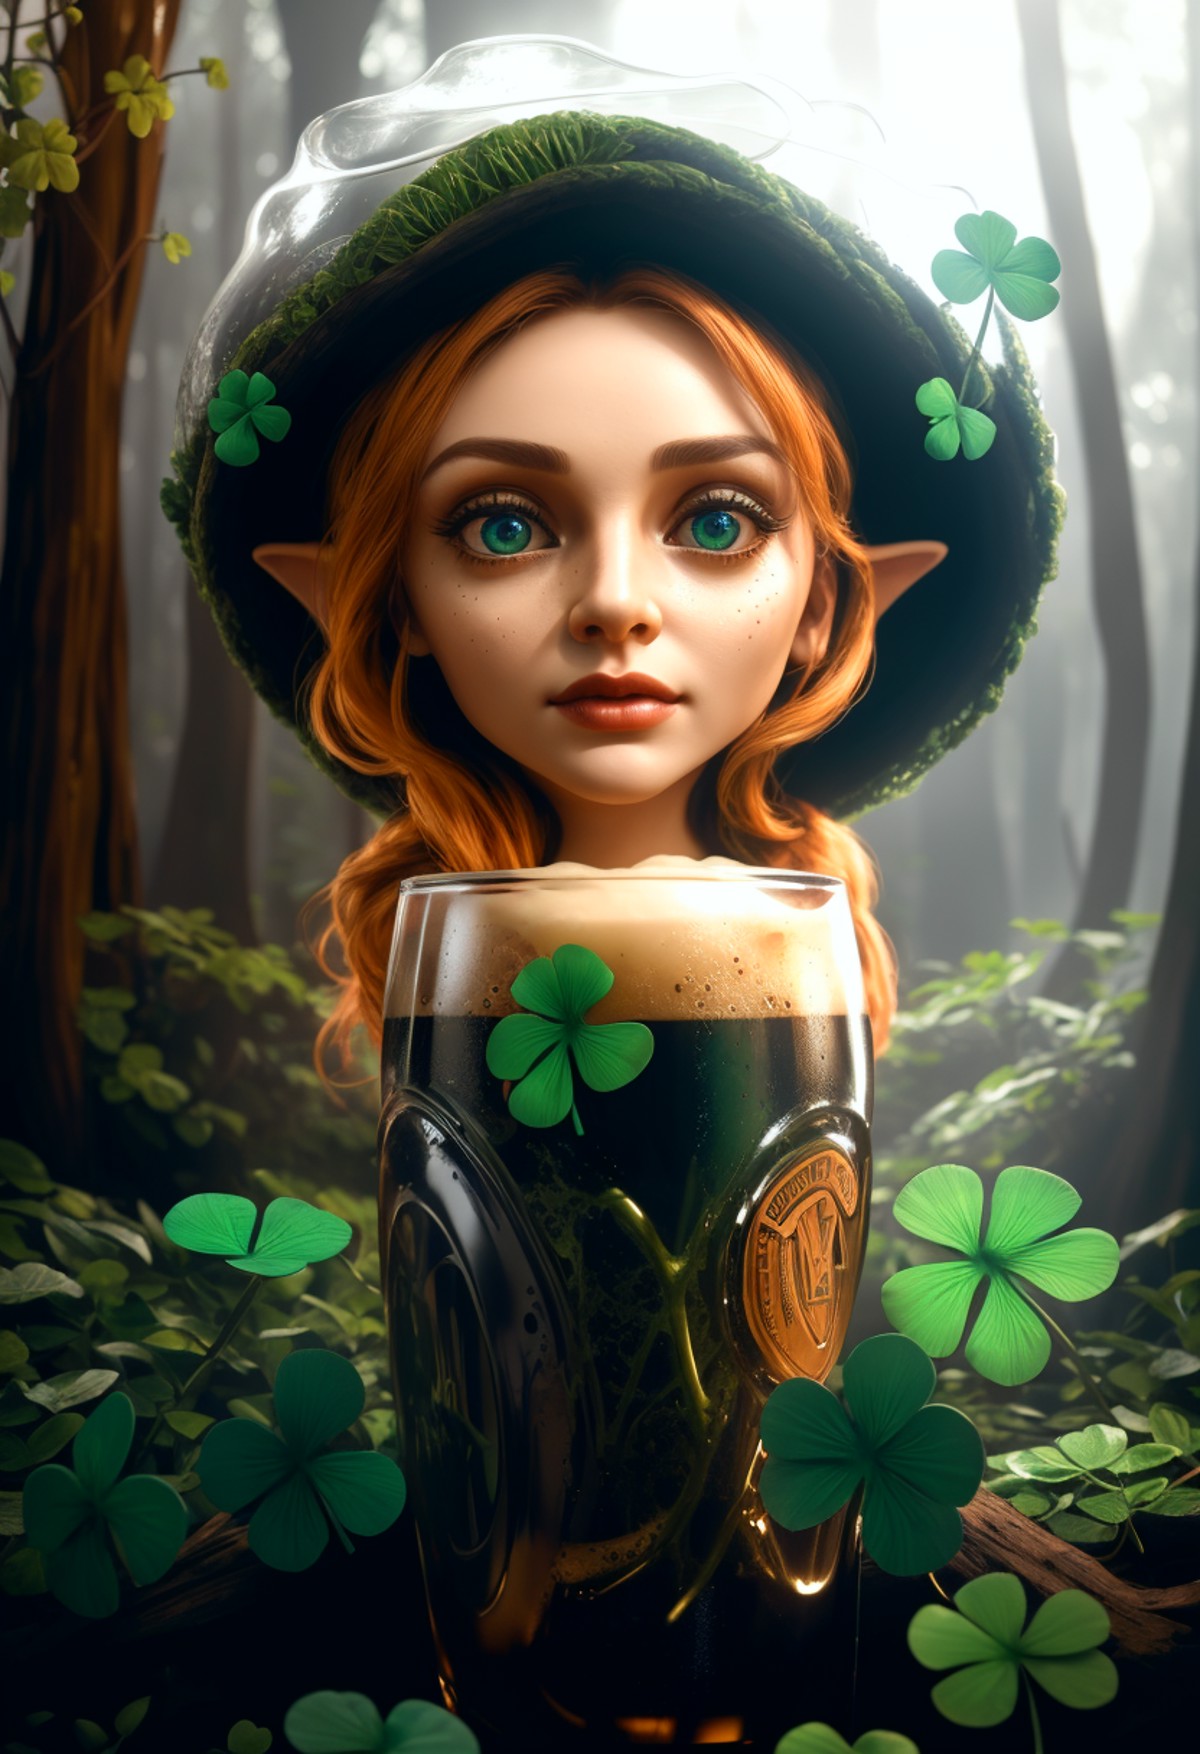 shamrock forest woman creature, drinking a glass of Guinness sitting in a giant glass of Guinness, big eyes, studio qualit...